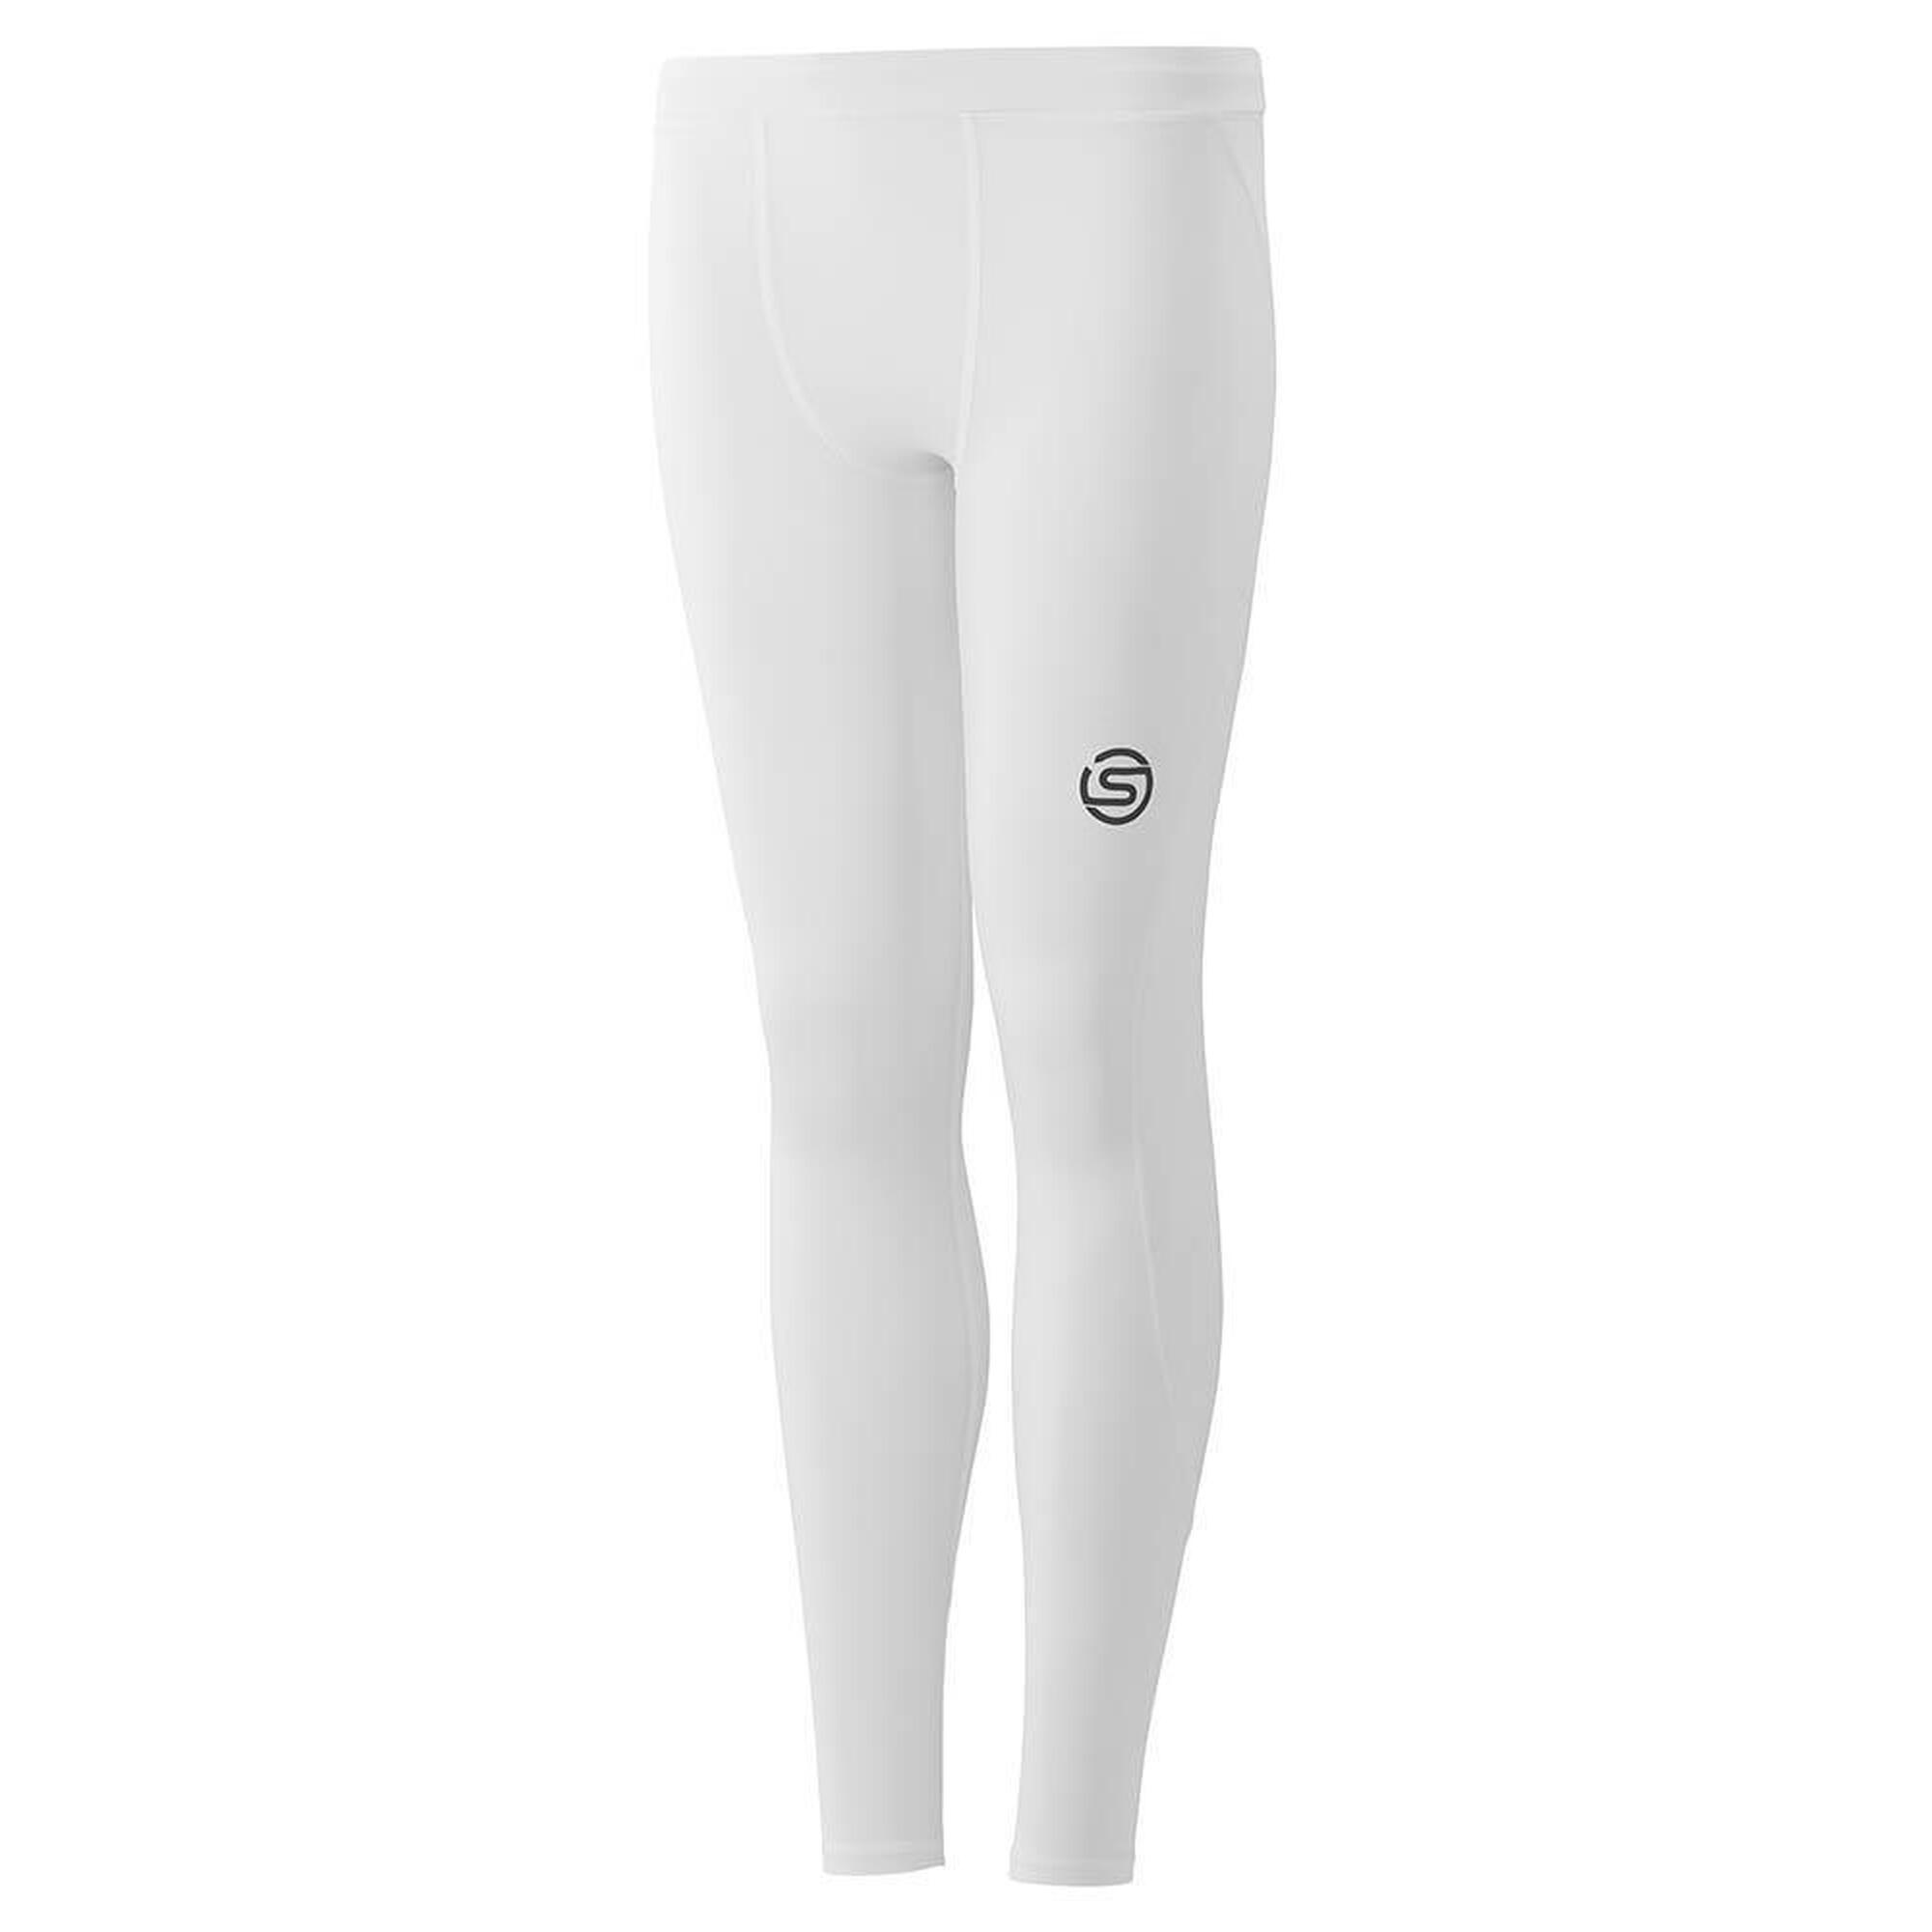 SKINS Series-1 Youth Tight - White - Size M 1/2